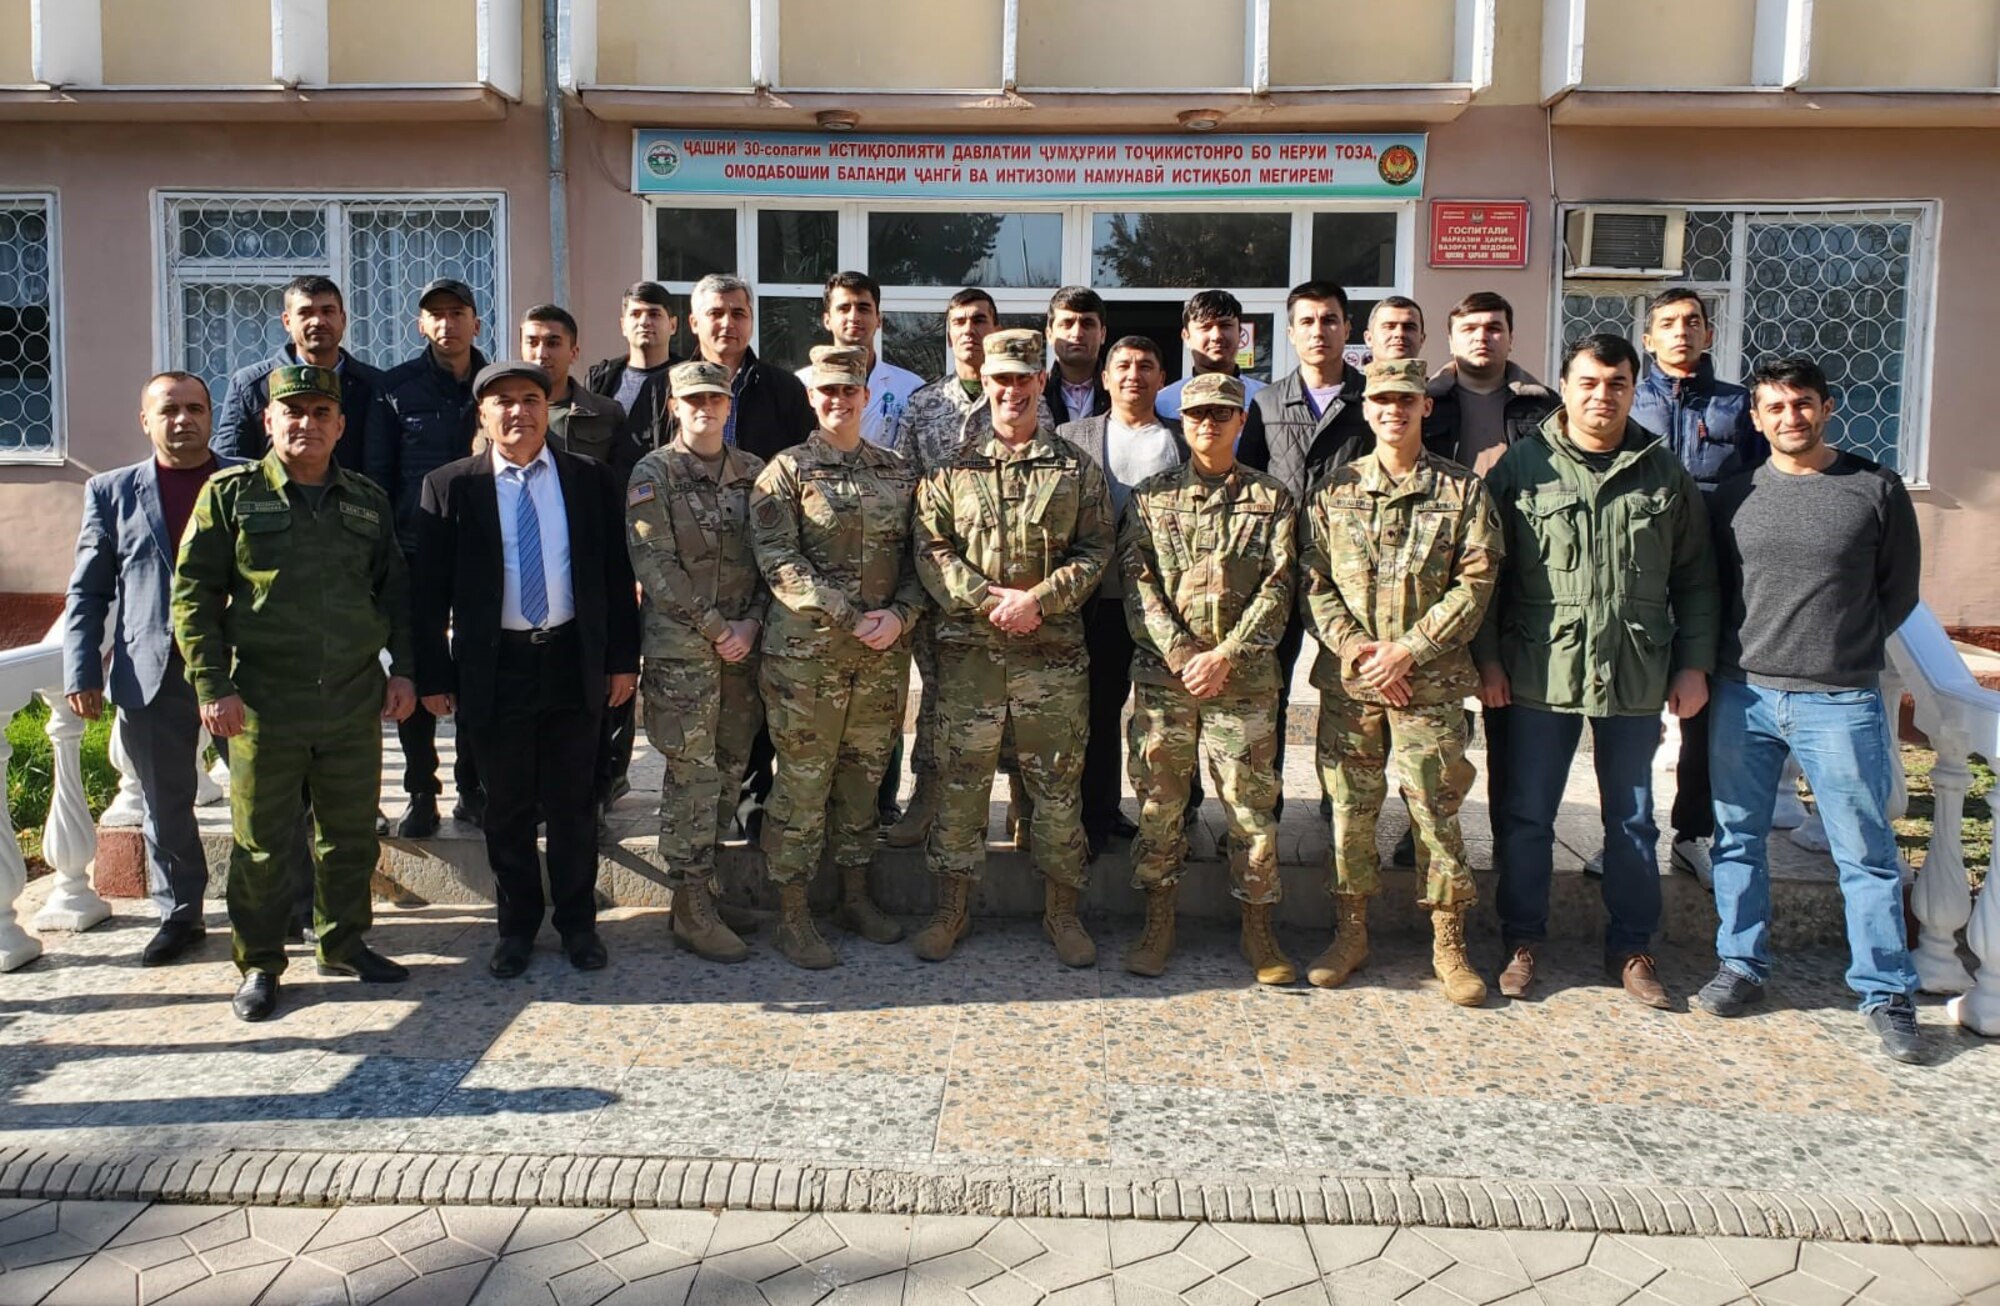 Virginia National Guard Soldiers and Airmen conduct a medical exchange with the Republic of Tajikistan Dec. 6-10, 2021, in Dushanbe, Tajikistan. The exchange was conducted in support of the Department of Defense’s State Partnership Program, in which Virginia and Tajikistan have been partners since 2003.